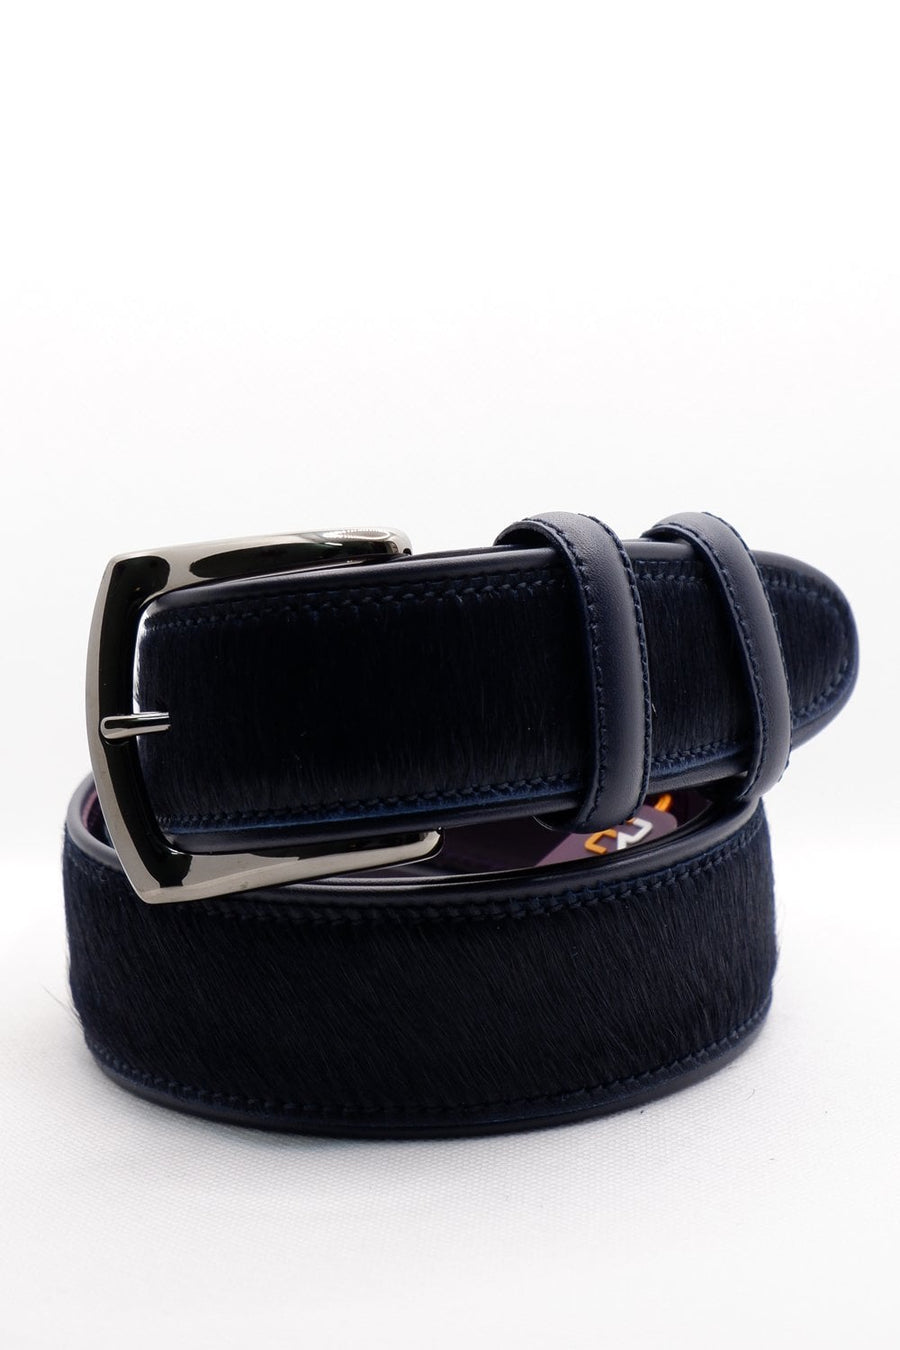 Buy the Elliot Rhodes Horsy Belt in Navy at Intro. Spend £50 for free UK delivery. Official stockists. We ship worldwide.